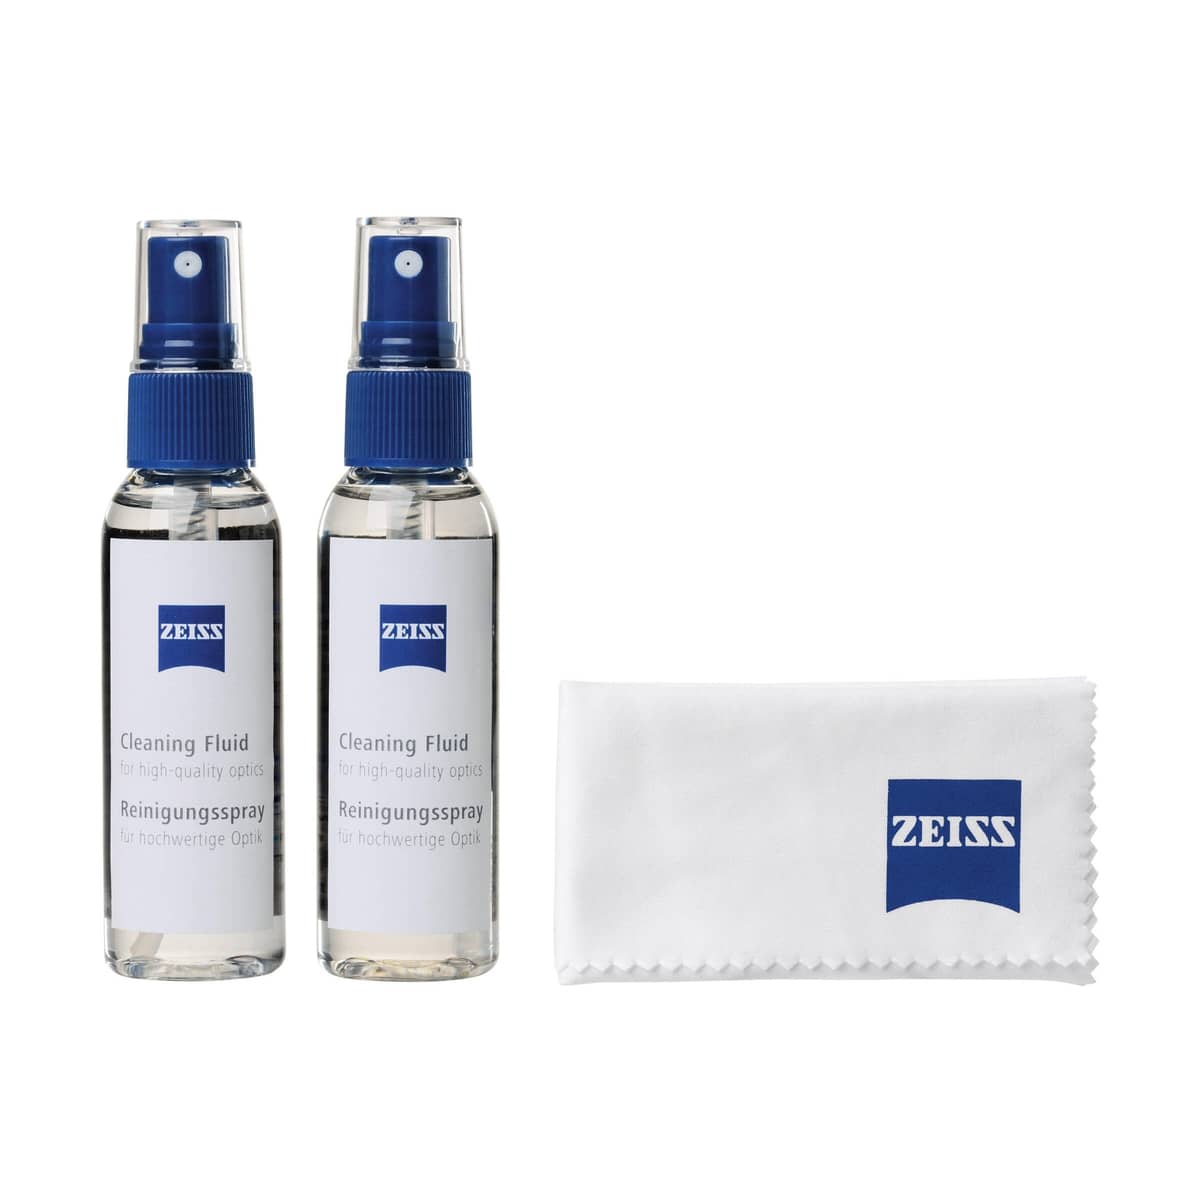 zeiss_cleaning_fluid_01